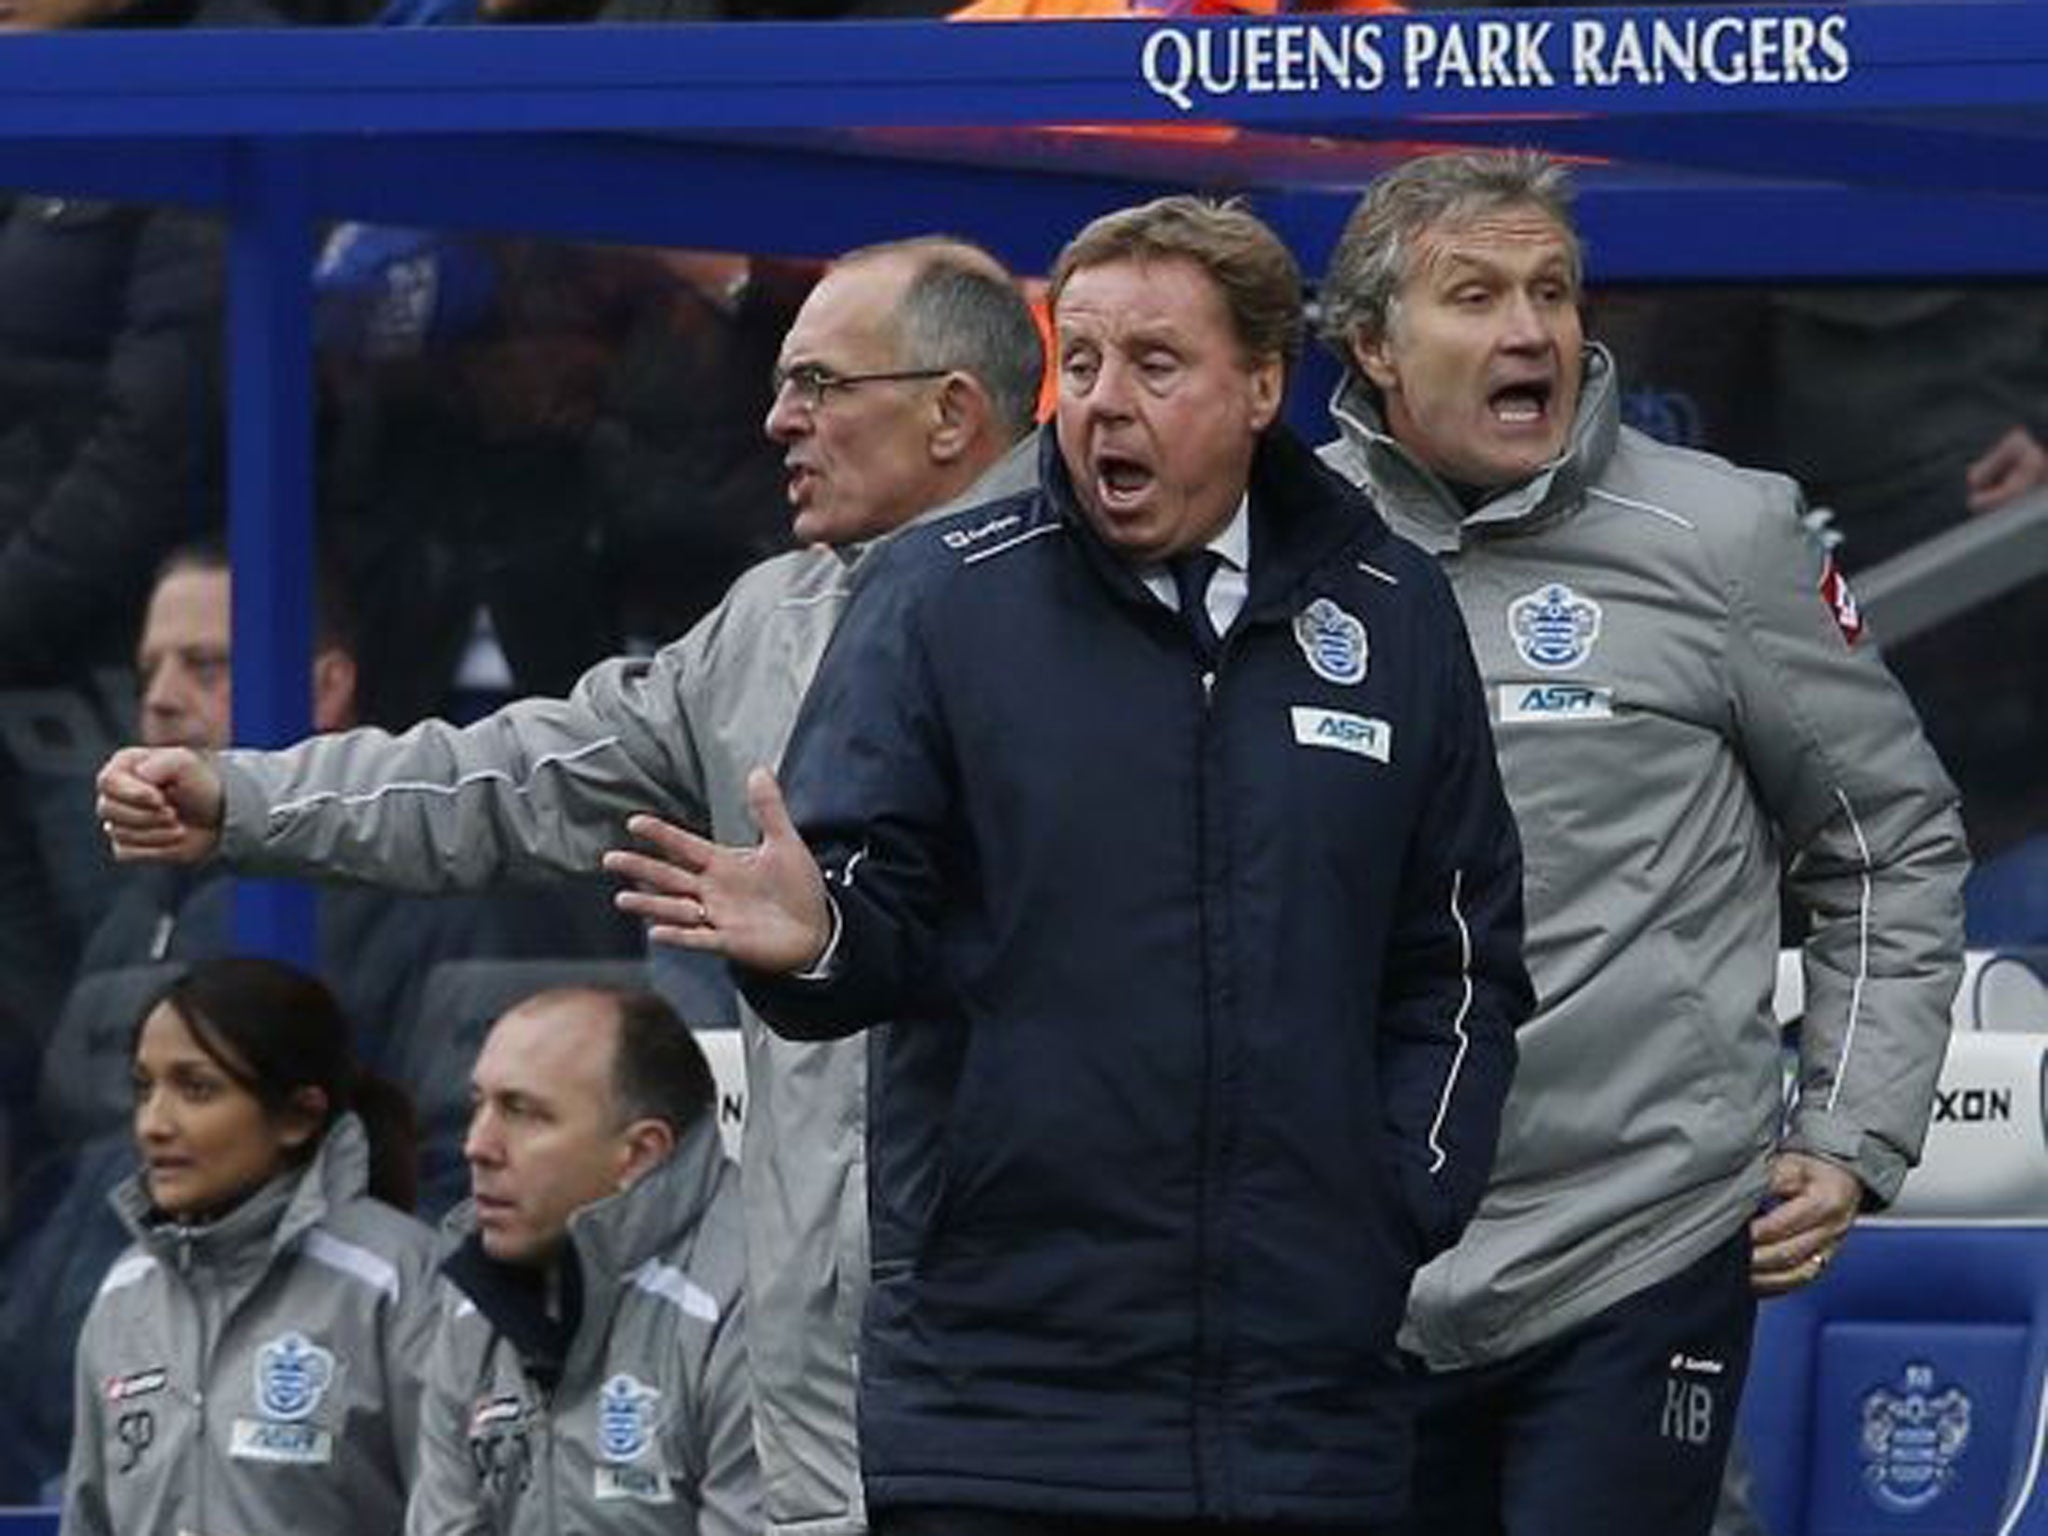 Harry Redknapp says he is not sleeping well, because “my whole life is consumed by saving QPR”